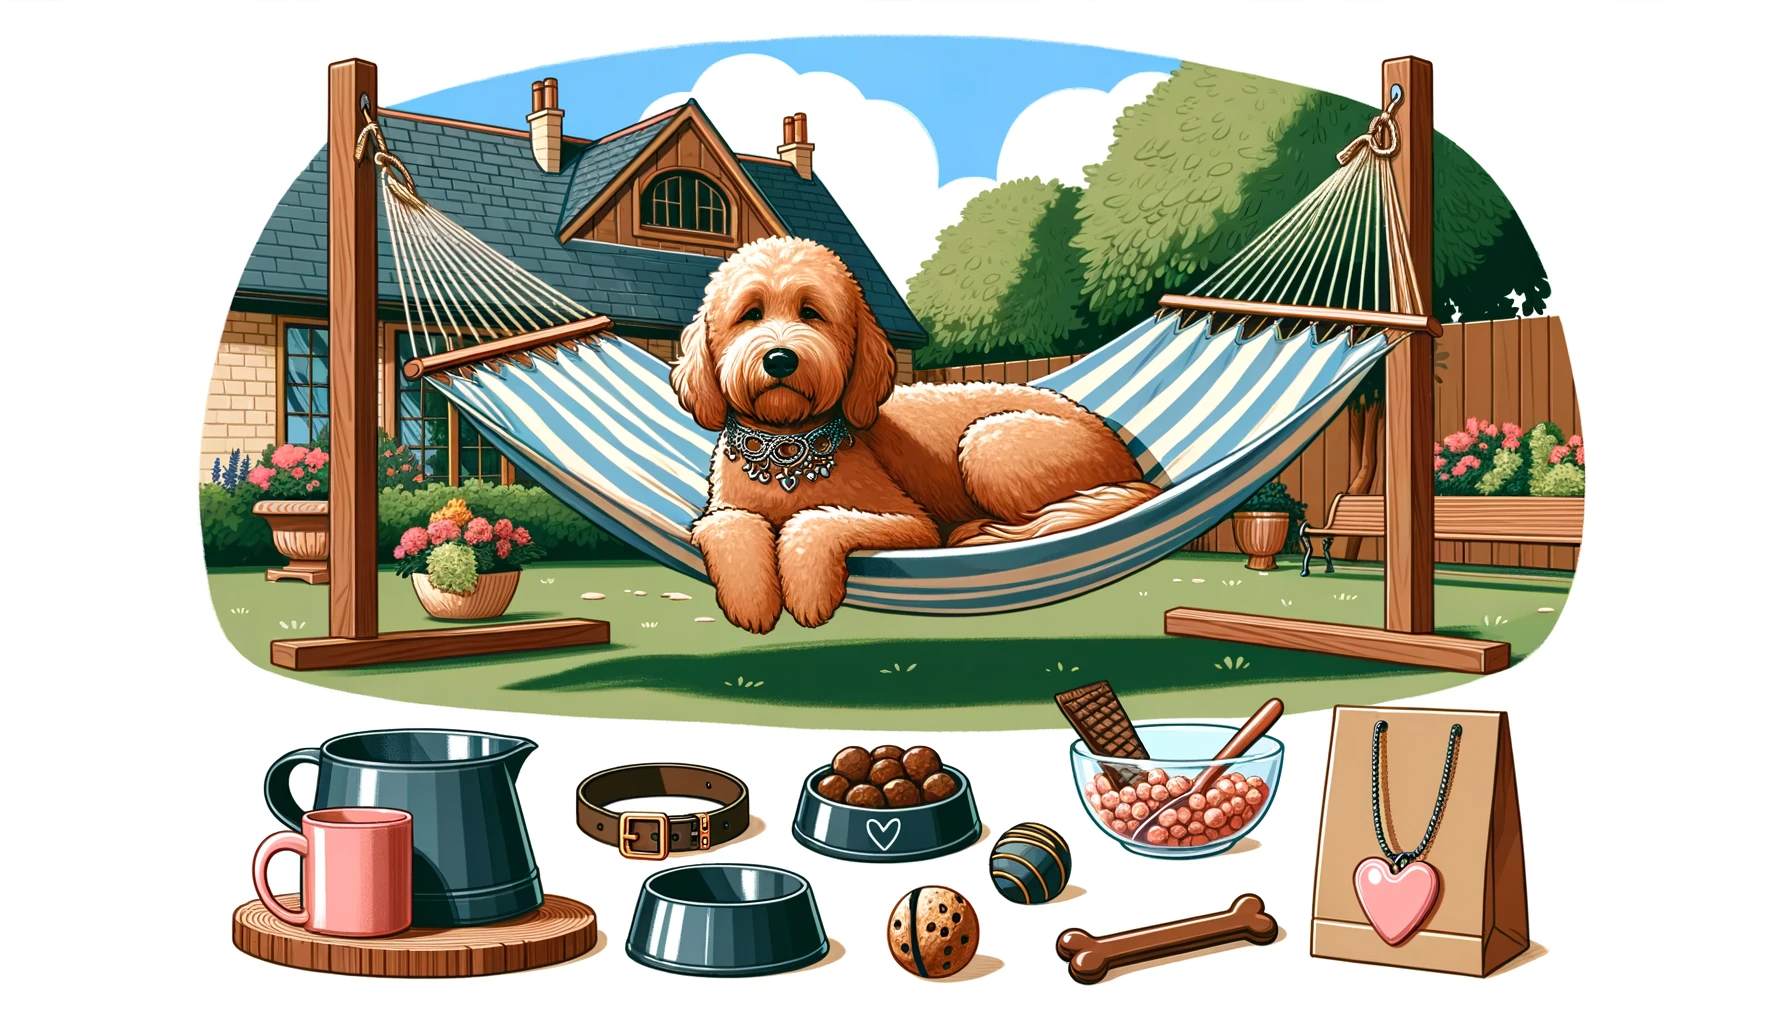 Illustration of a content Labradoodle resting on a hammock in a garden setting. The scene showcases various luxurious pet items such as a designer collar, gourmet dog treats, and a personalized water dish, representing the lavish lifestyle some owners provide for their pets.